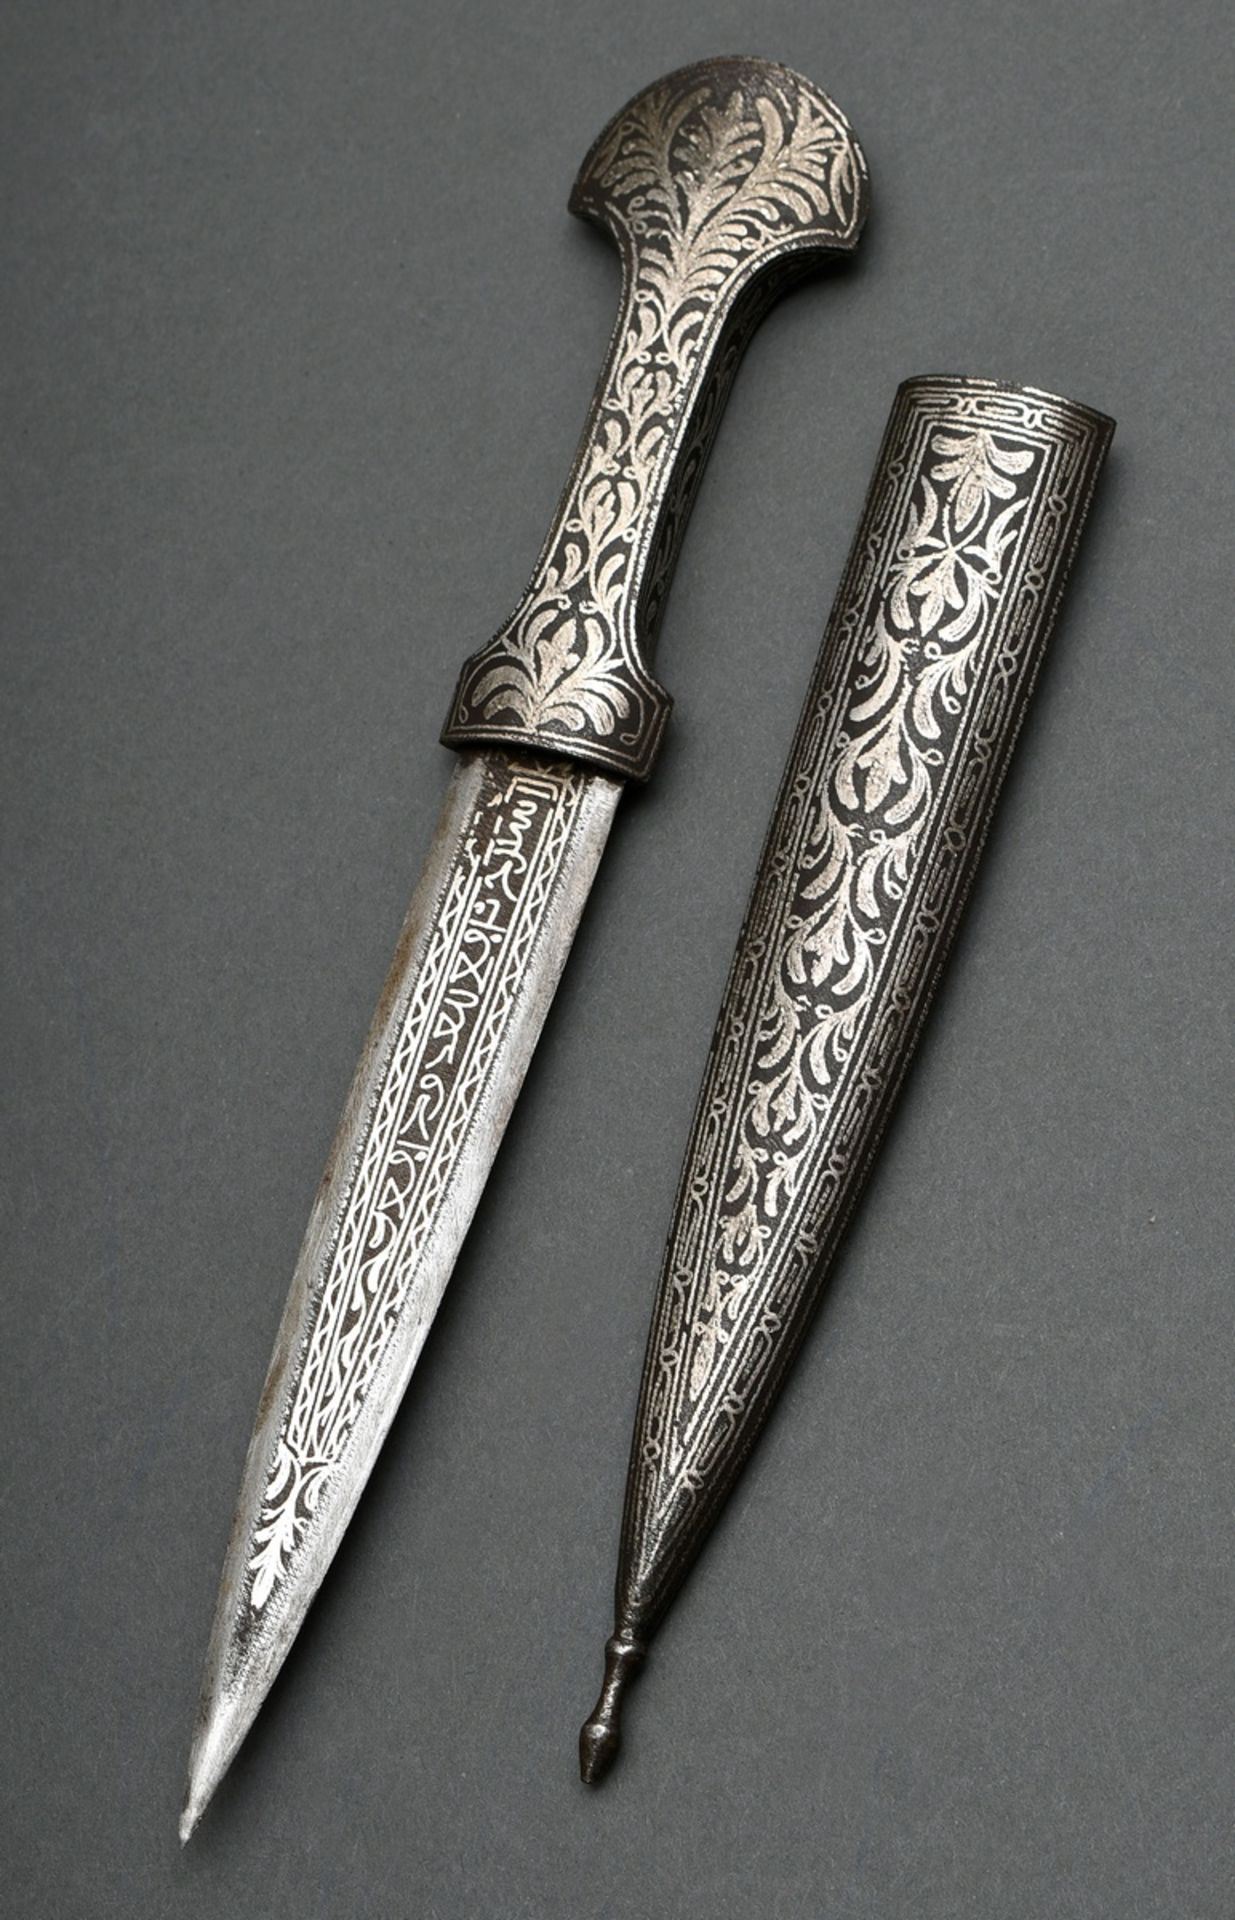 Mughal dagger with silver-inlaid floral motif on handle and scabbard and double-edged blade with in - Image 6 of 6